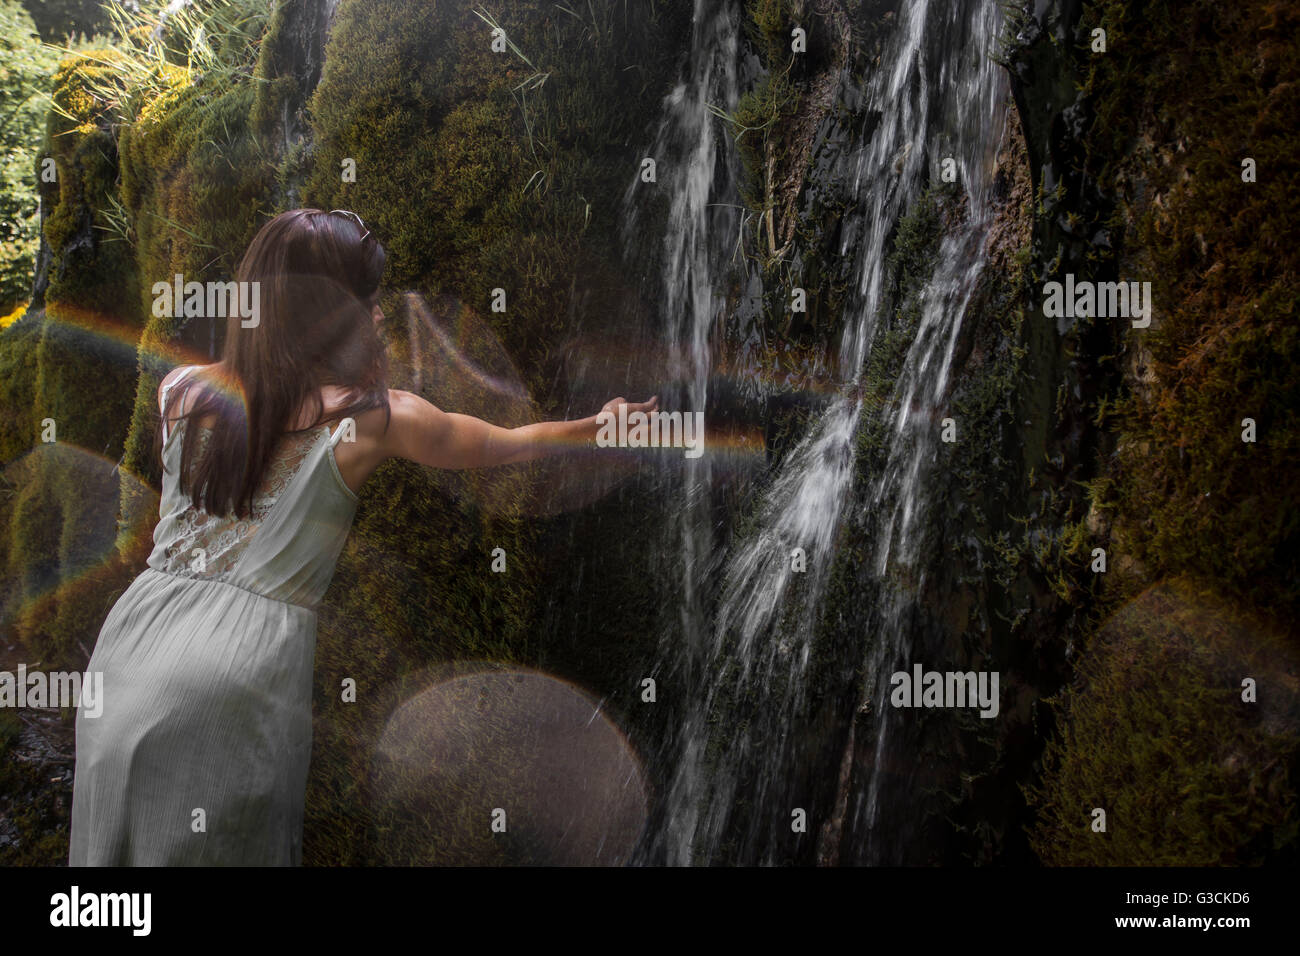 Waterfall Weißenbronnen, girl holding hand in the water, district Ravensburg, Baden-Württemberg, Germany, moss, water, light reflections, Stock Photo